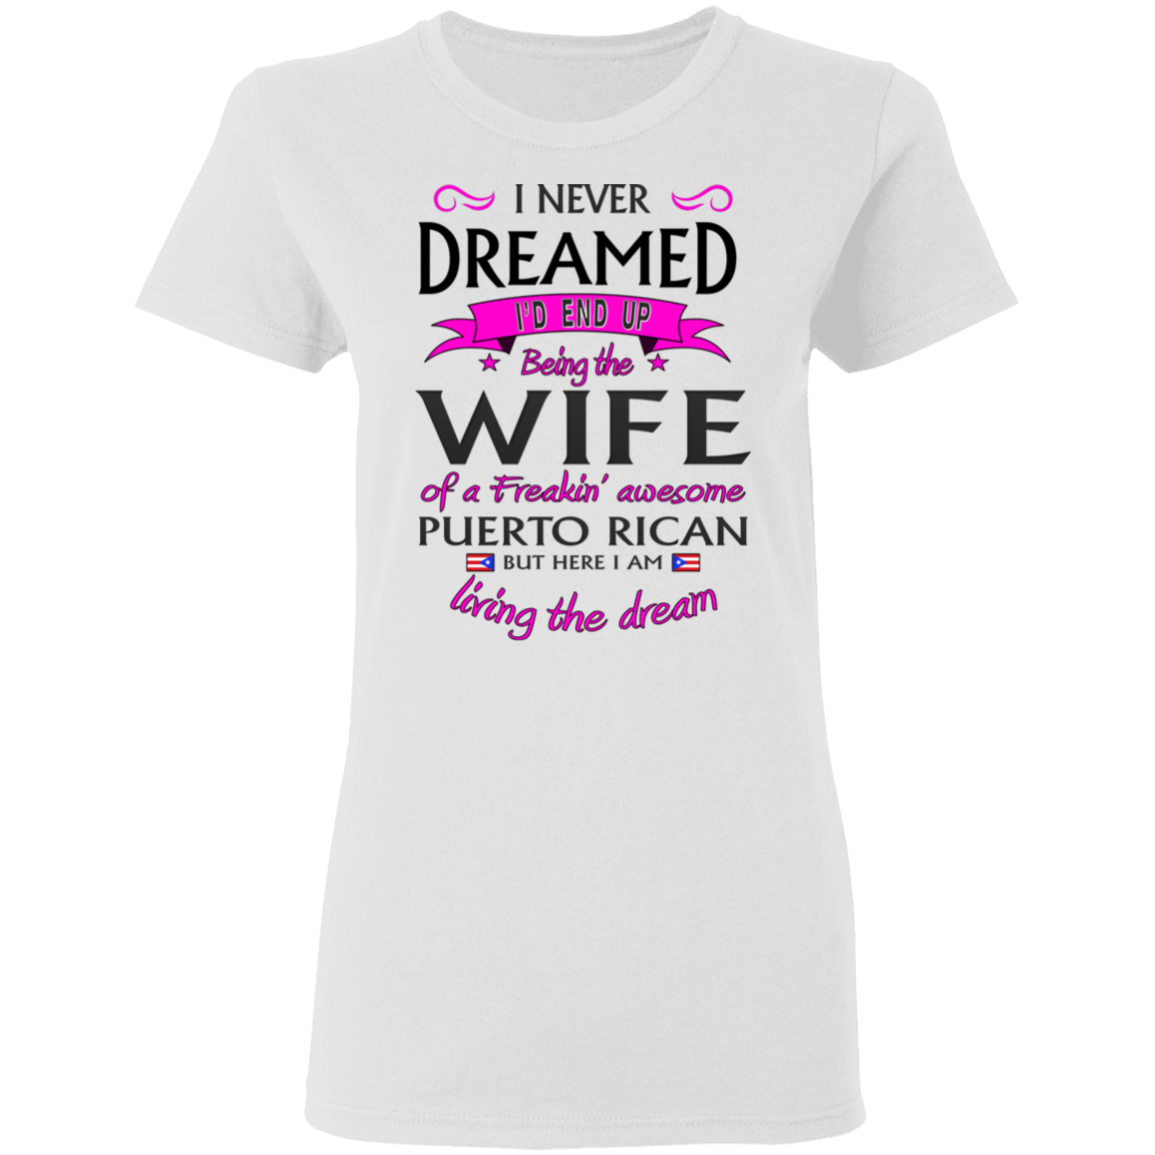 Wife of Awesome PR 5.3 oz. T-Shirt - Puerto Rican Pride